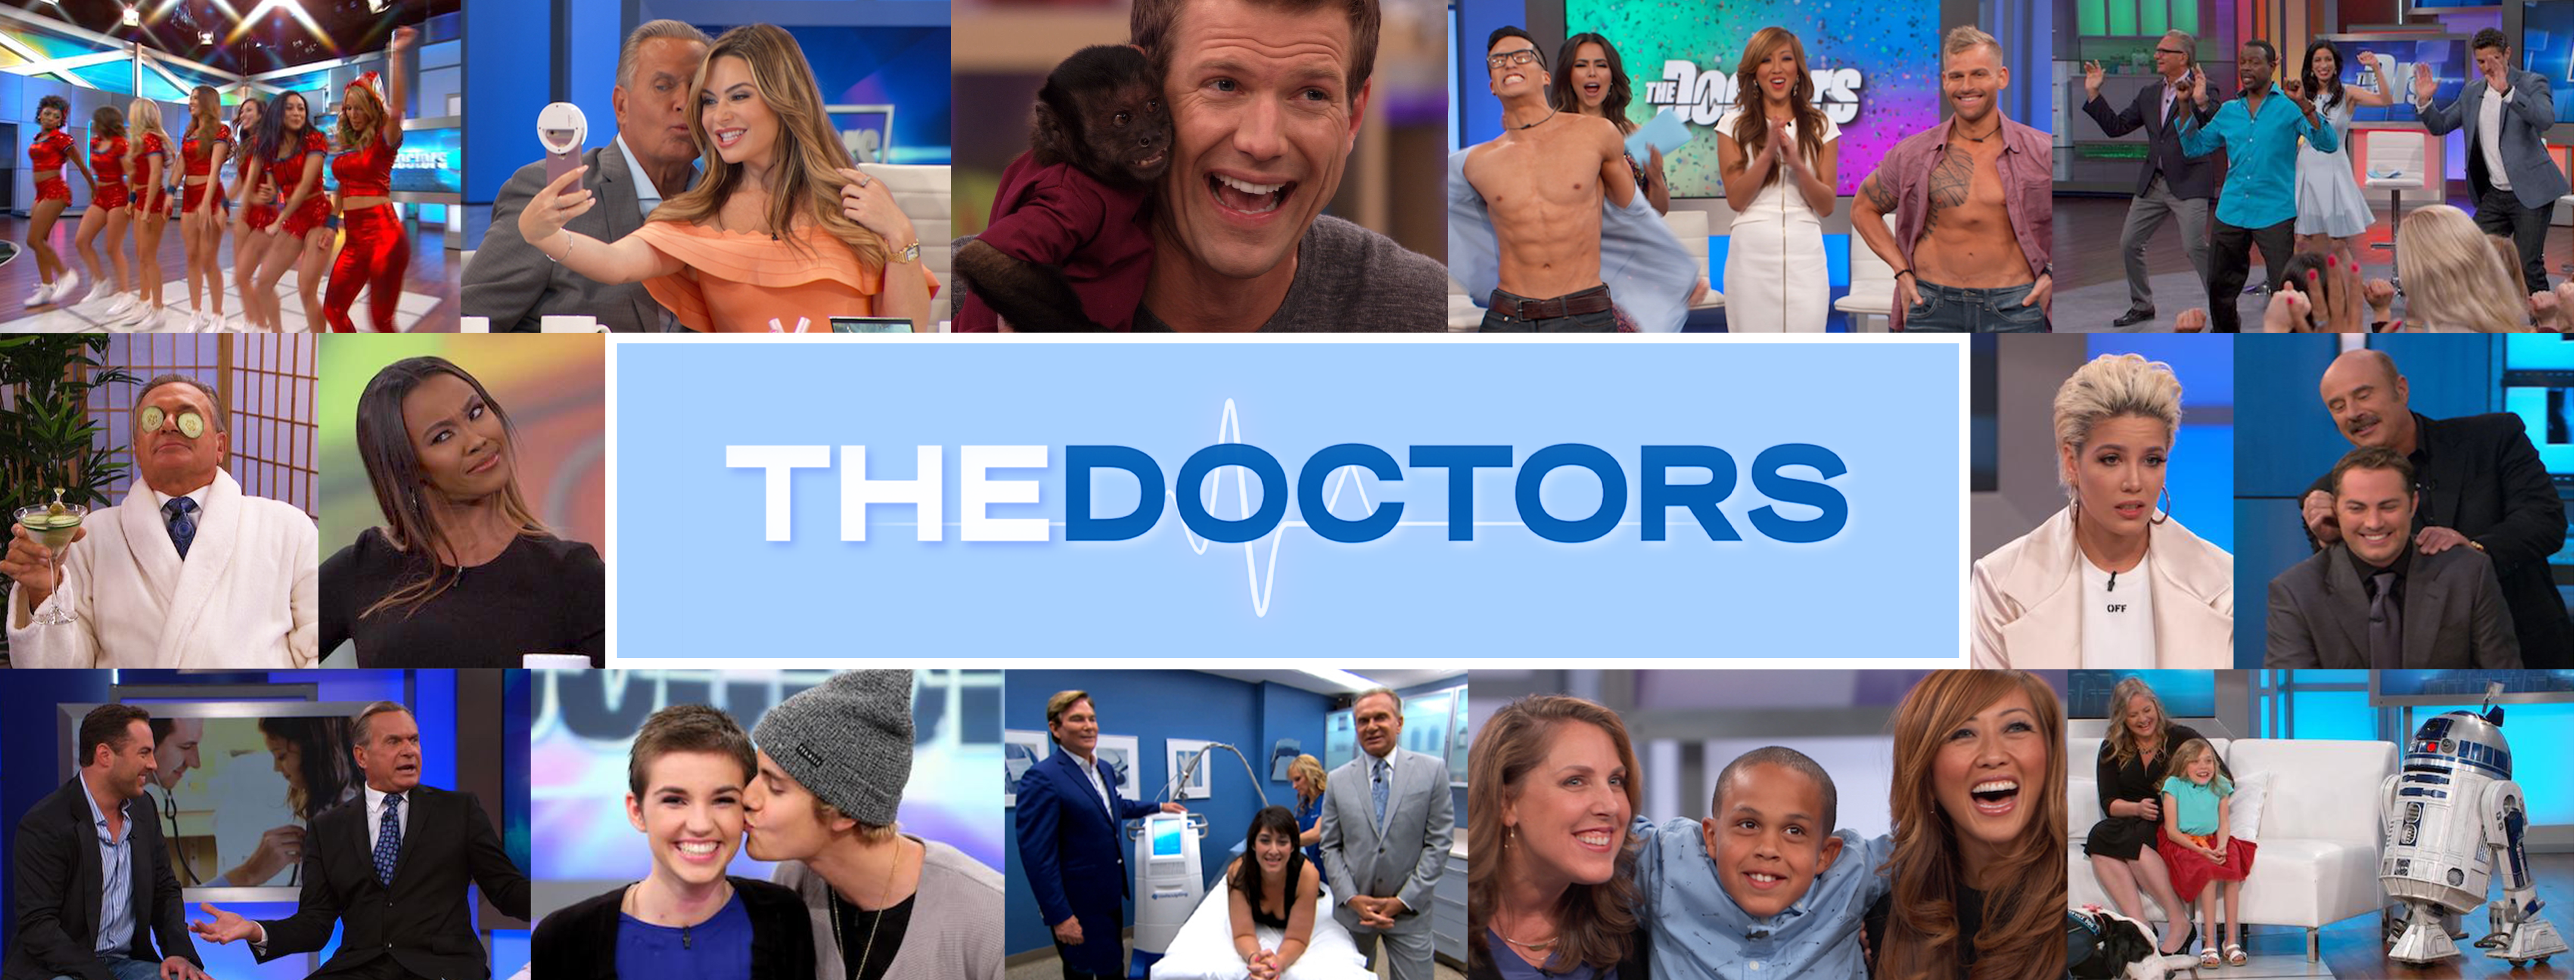 Kevin Ware's Basketball Injury | The Doctors TV Show